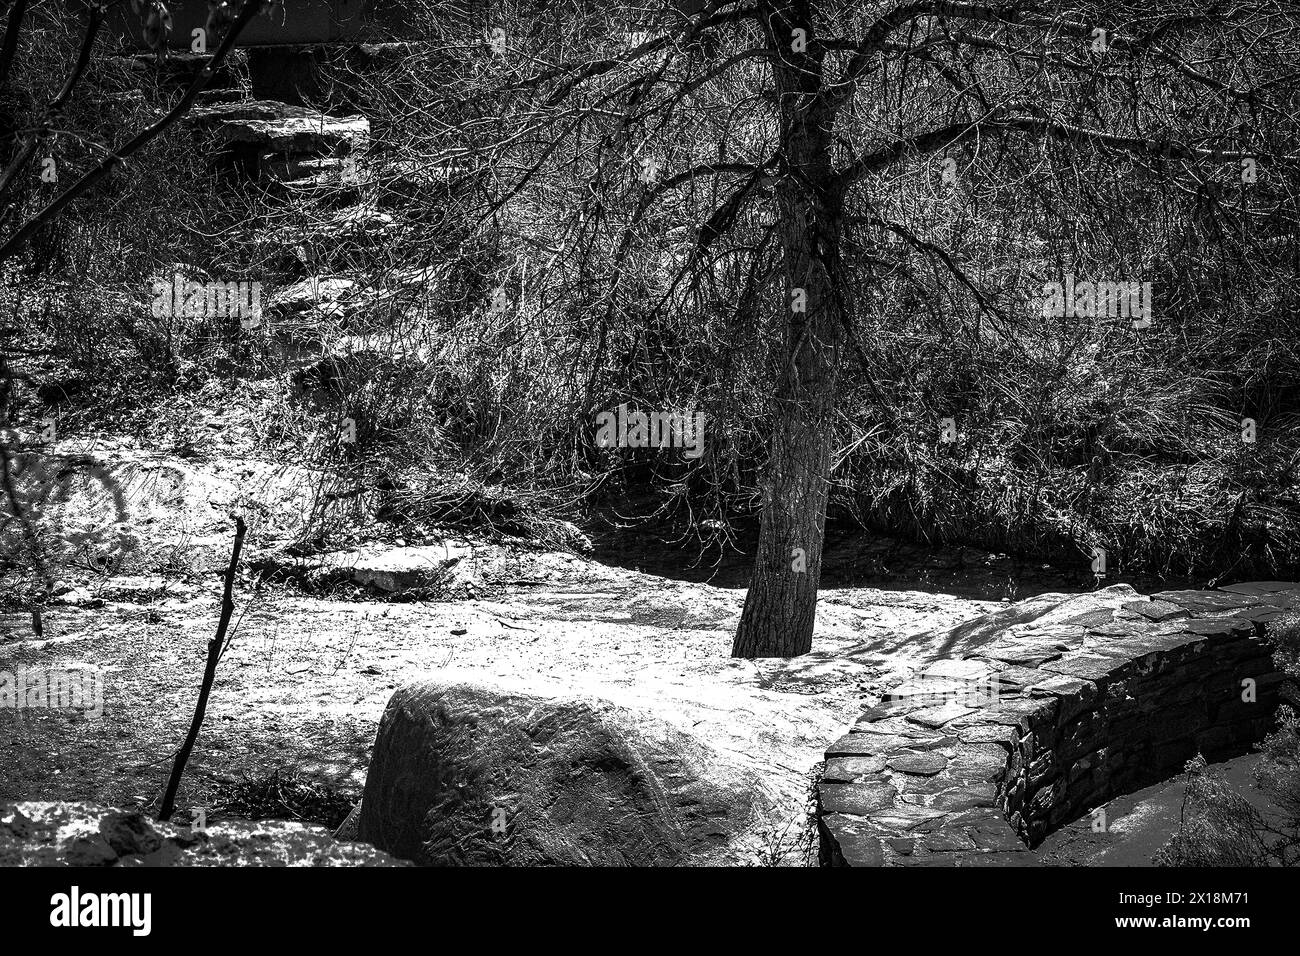 A dead tree stands near the Santa Fe river with boulders nearby, and radiant plants. In monochrome Stock Photo